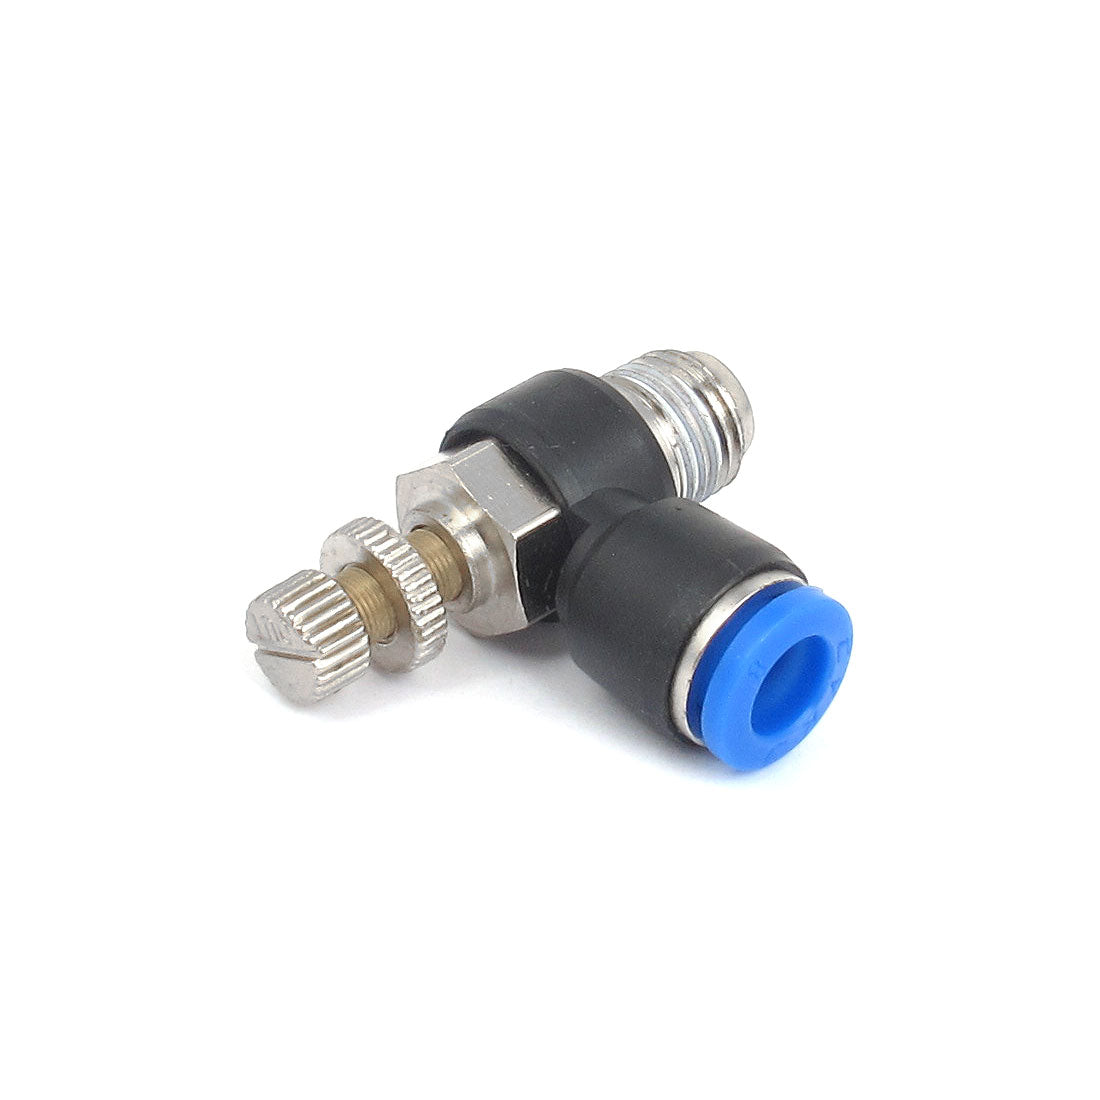 uxcell Uxcell 8mm x 1/4BSP Flow Speed Control Valve Connector Elbow Pneumatic Push in Fitting